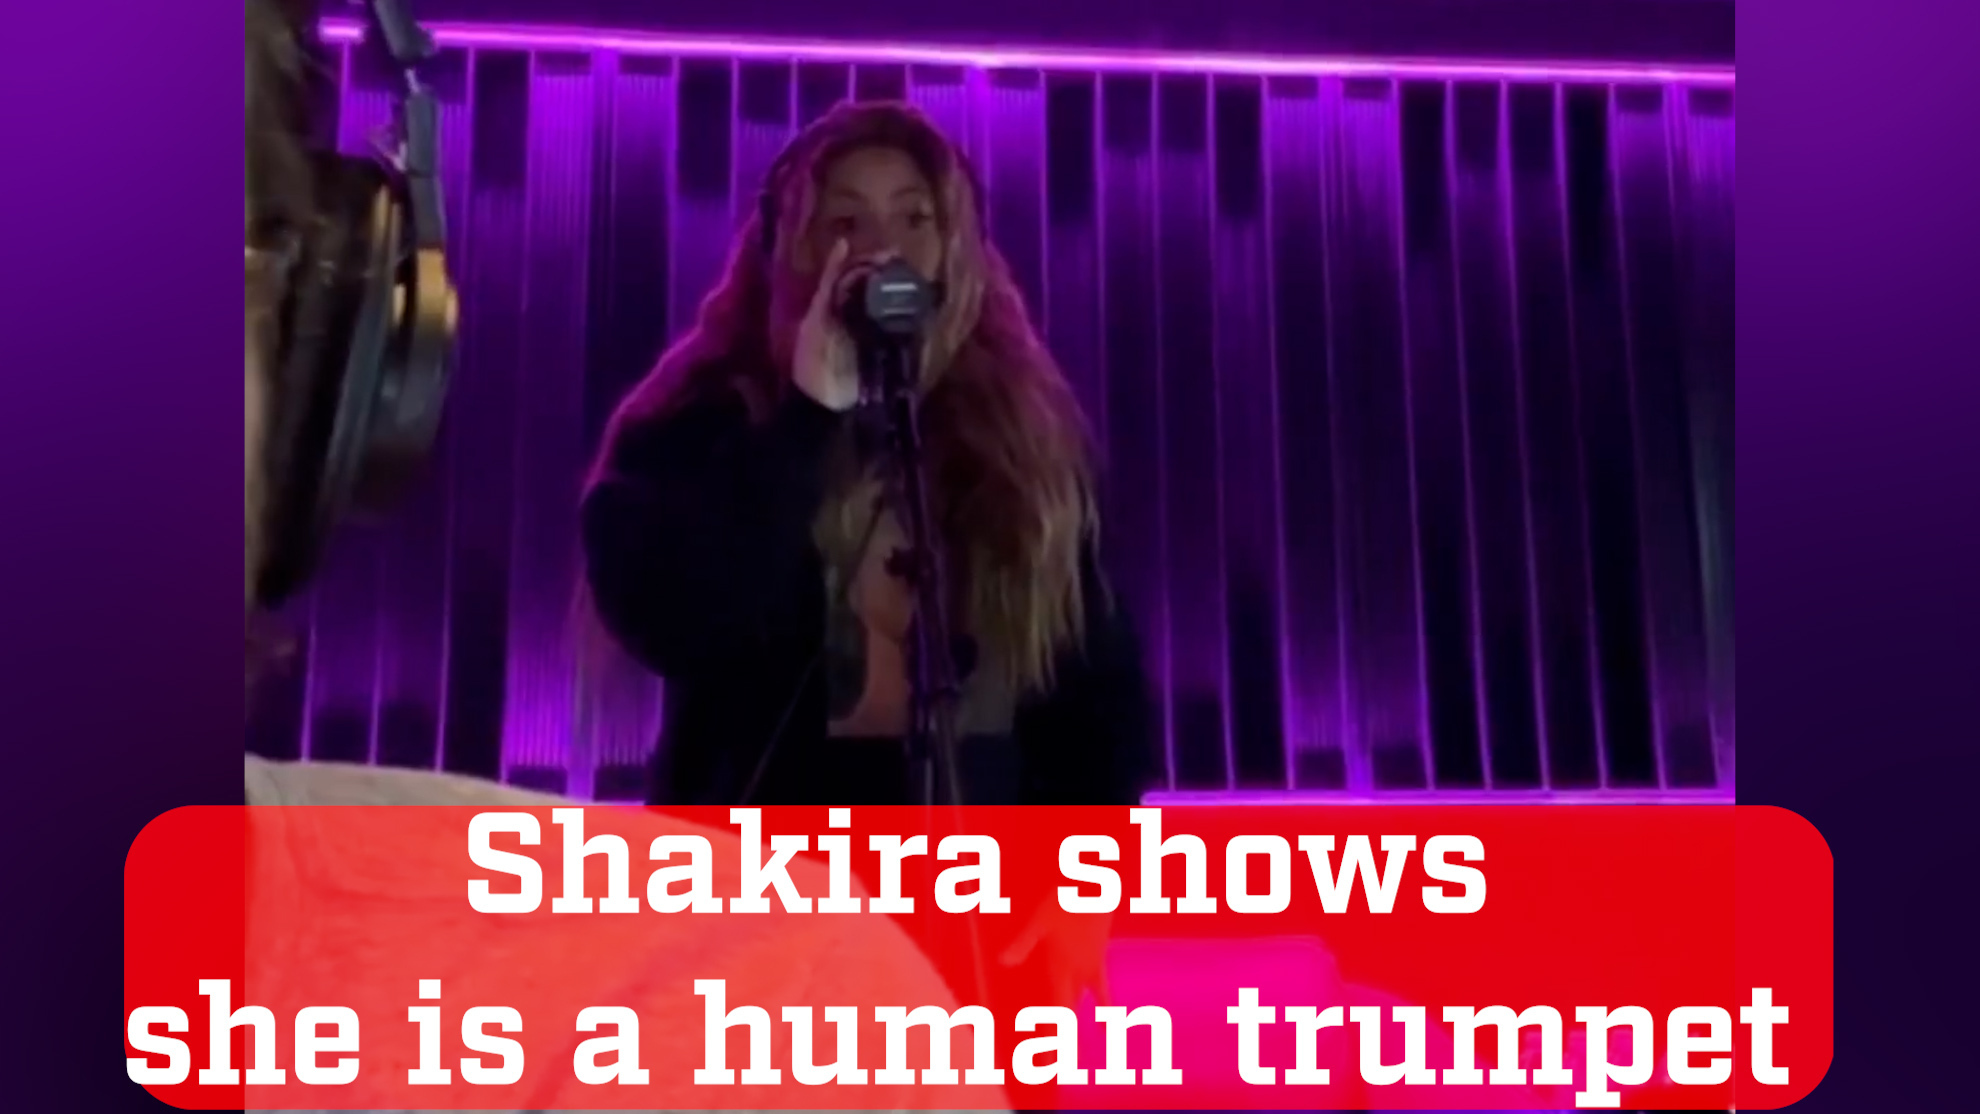 A human trumpet! Shakira shows the world her ability to sound like a real trumpet